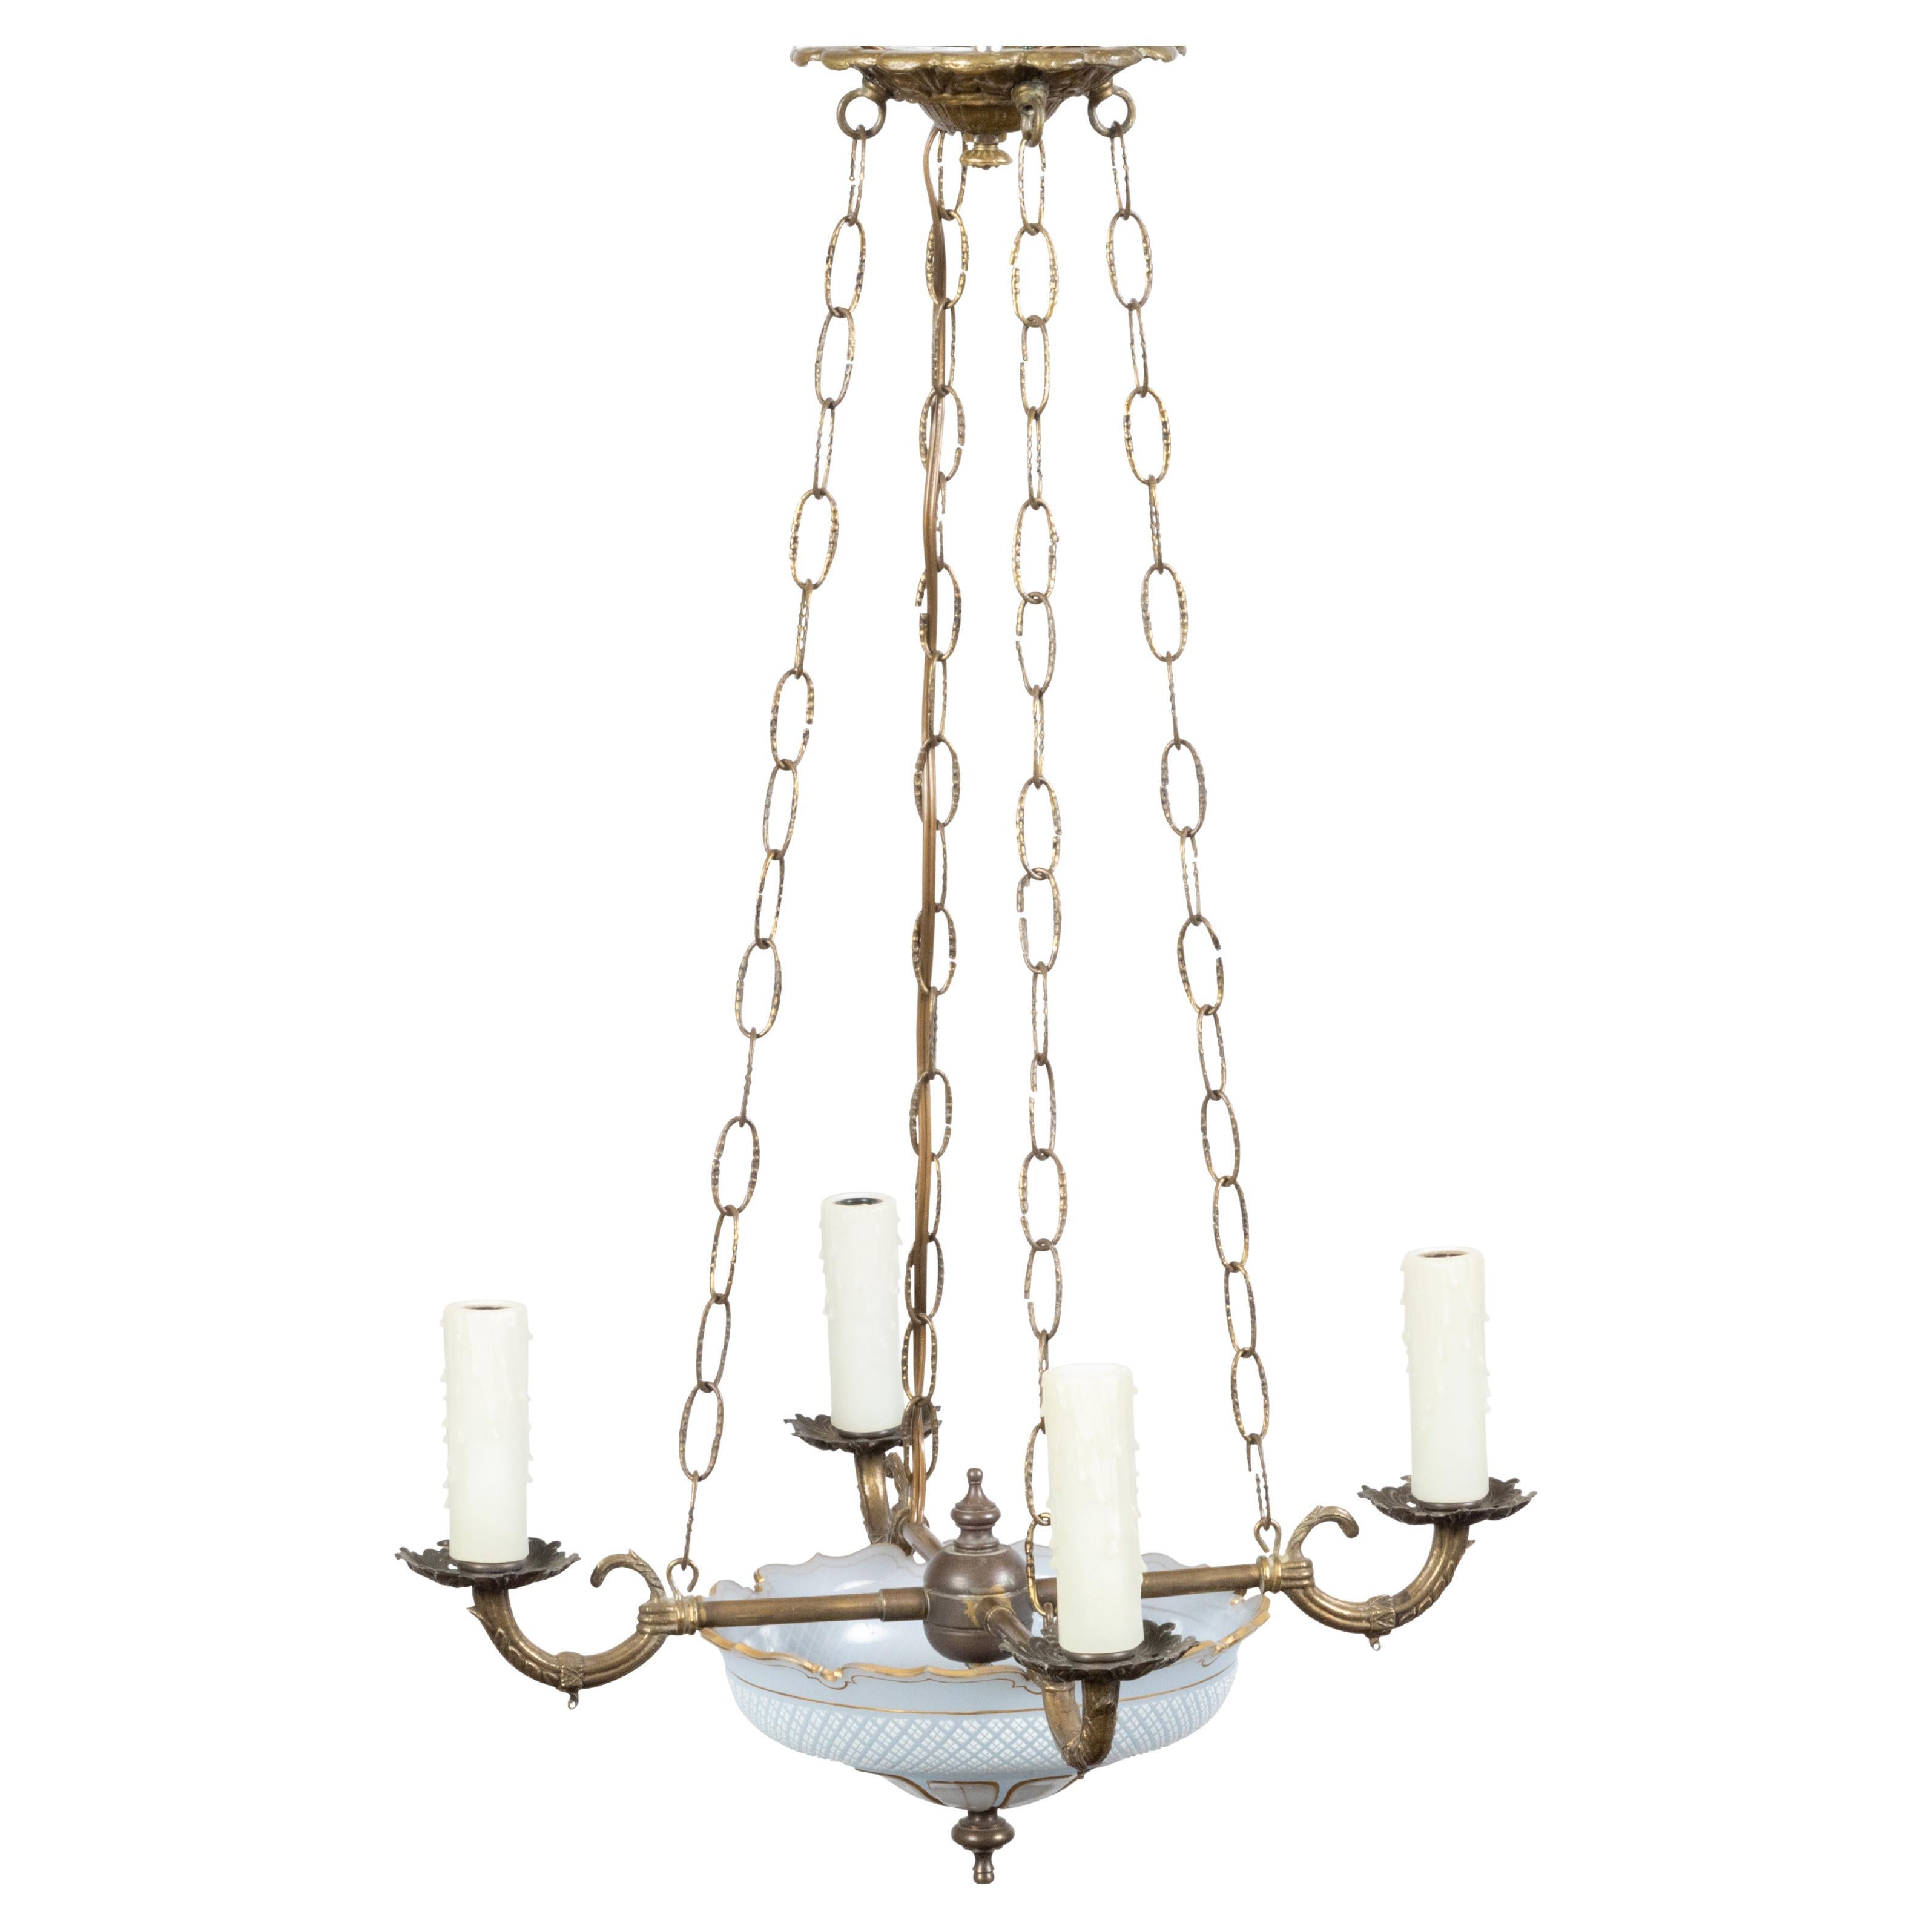 French 1900s Opaline Four-Light Chandelier with Leaf Motifs and Profiled Links